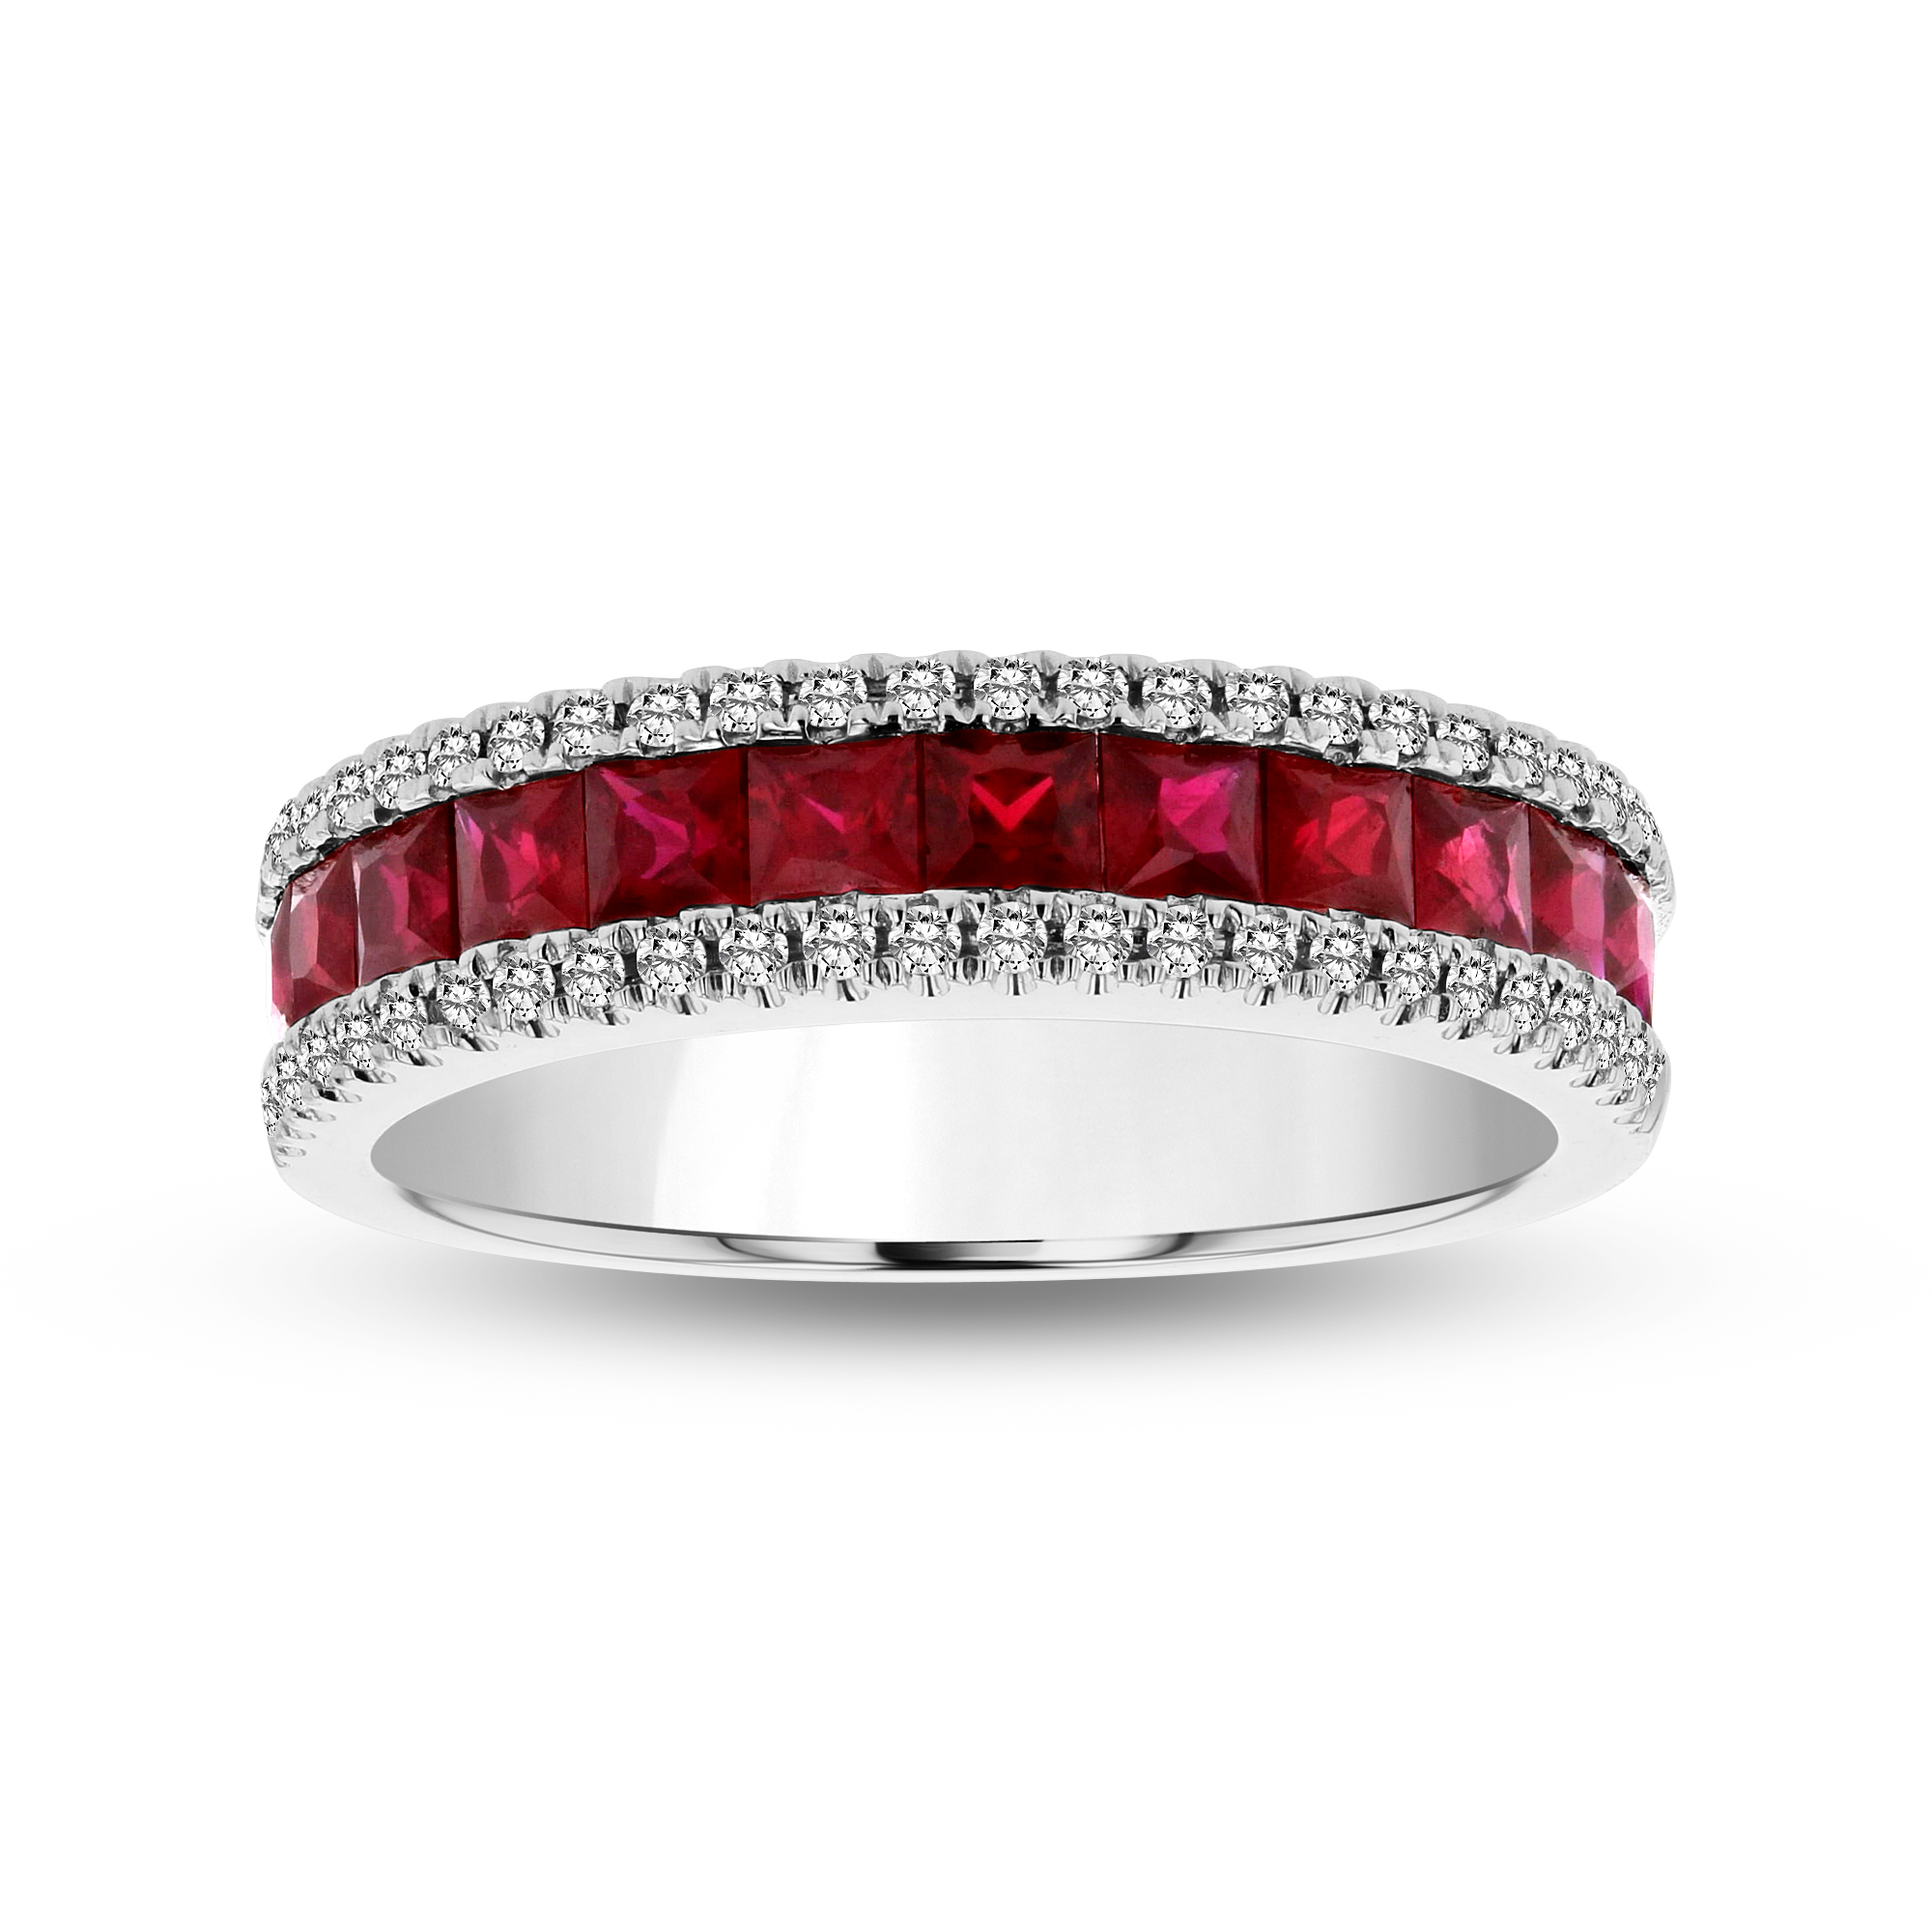 View 1.40ctw Diamond and Ruby Ring in 18k White Gold